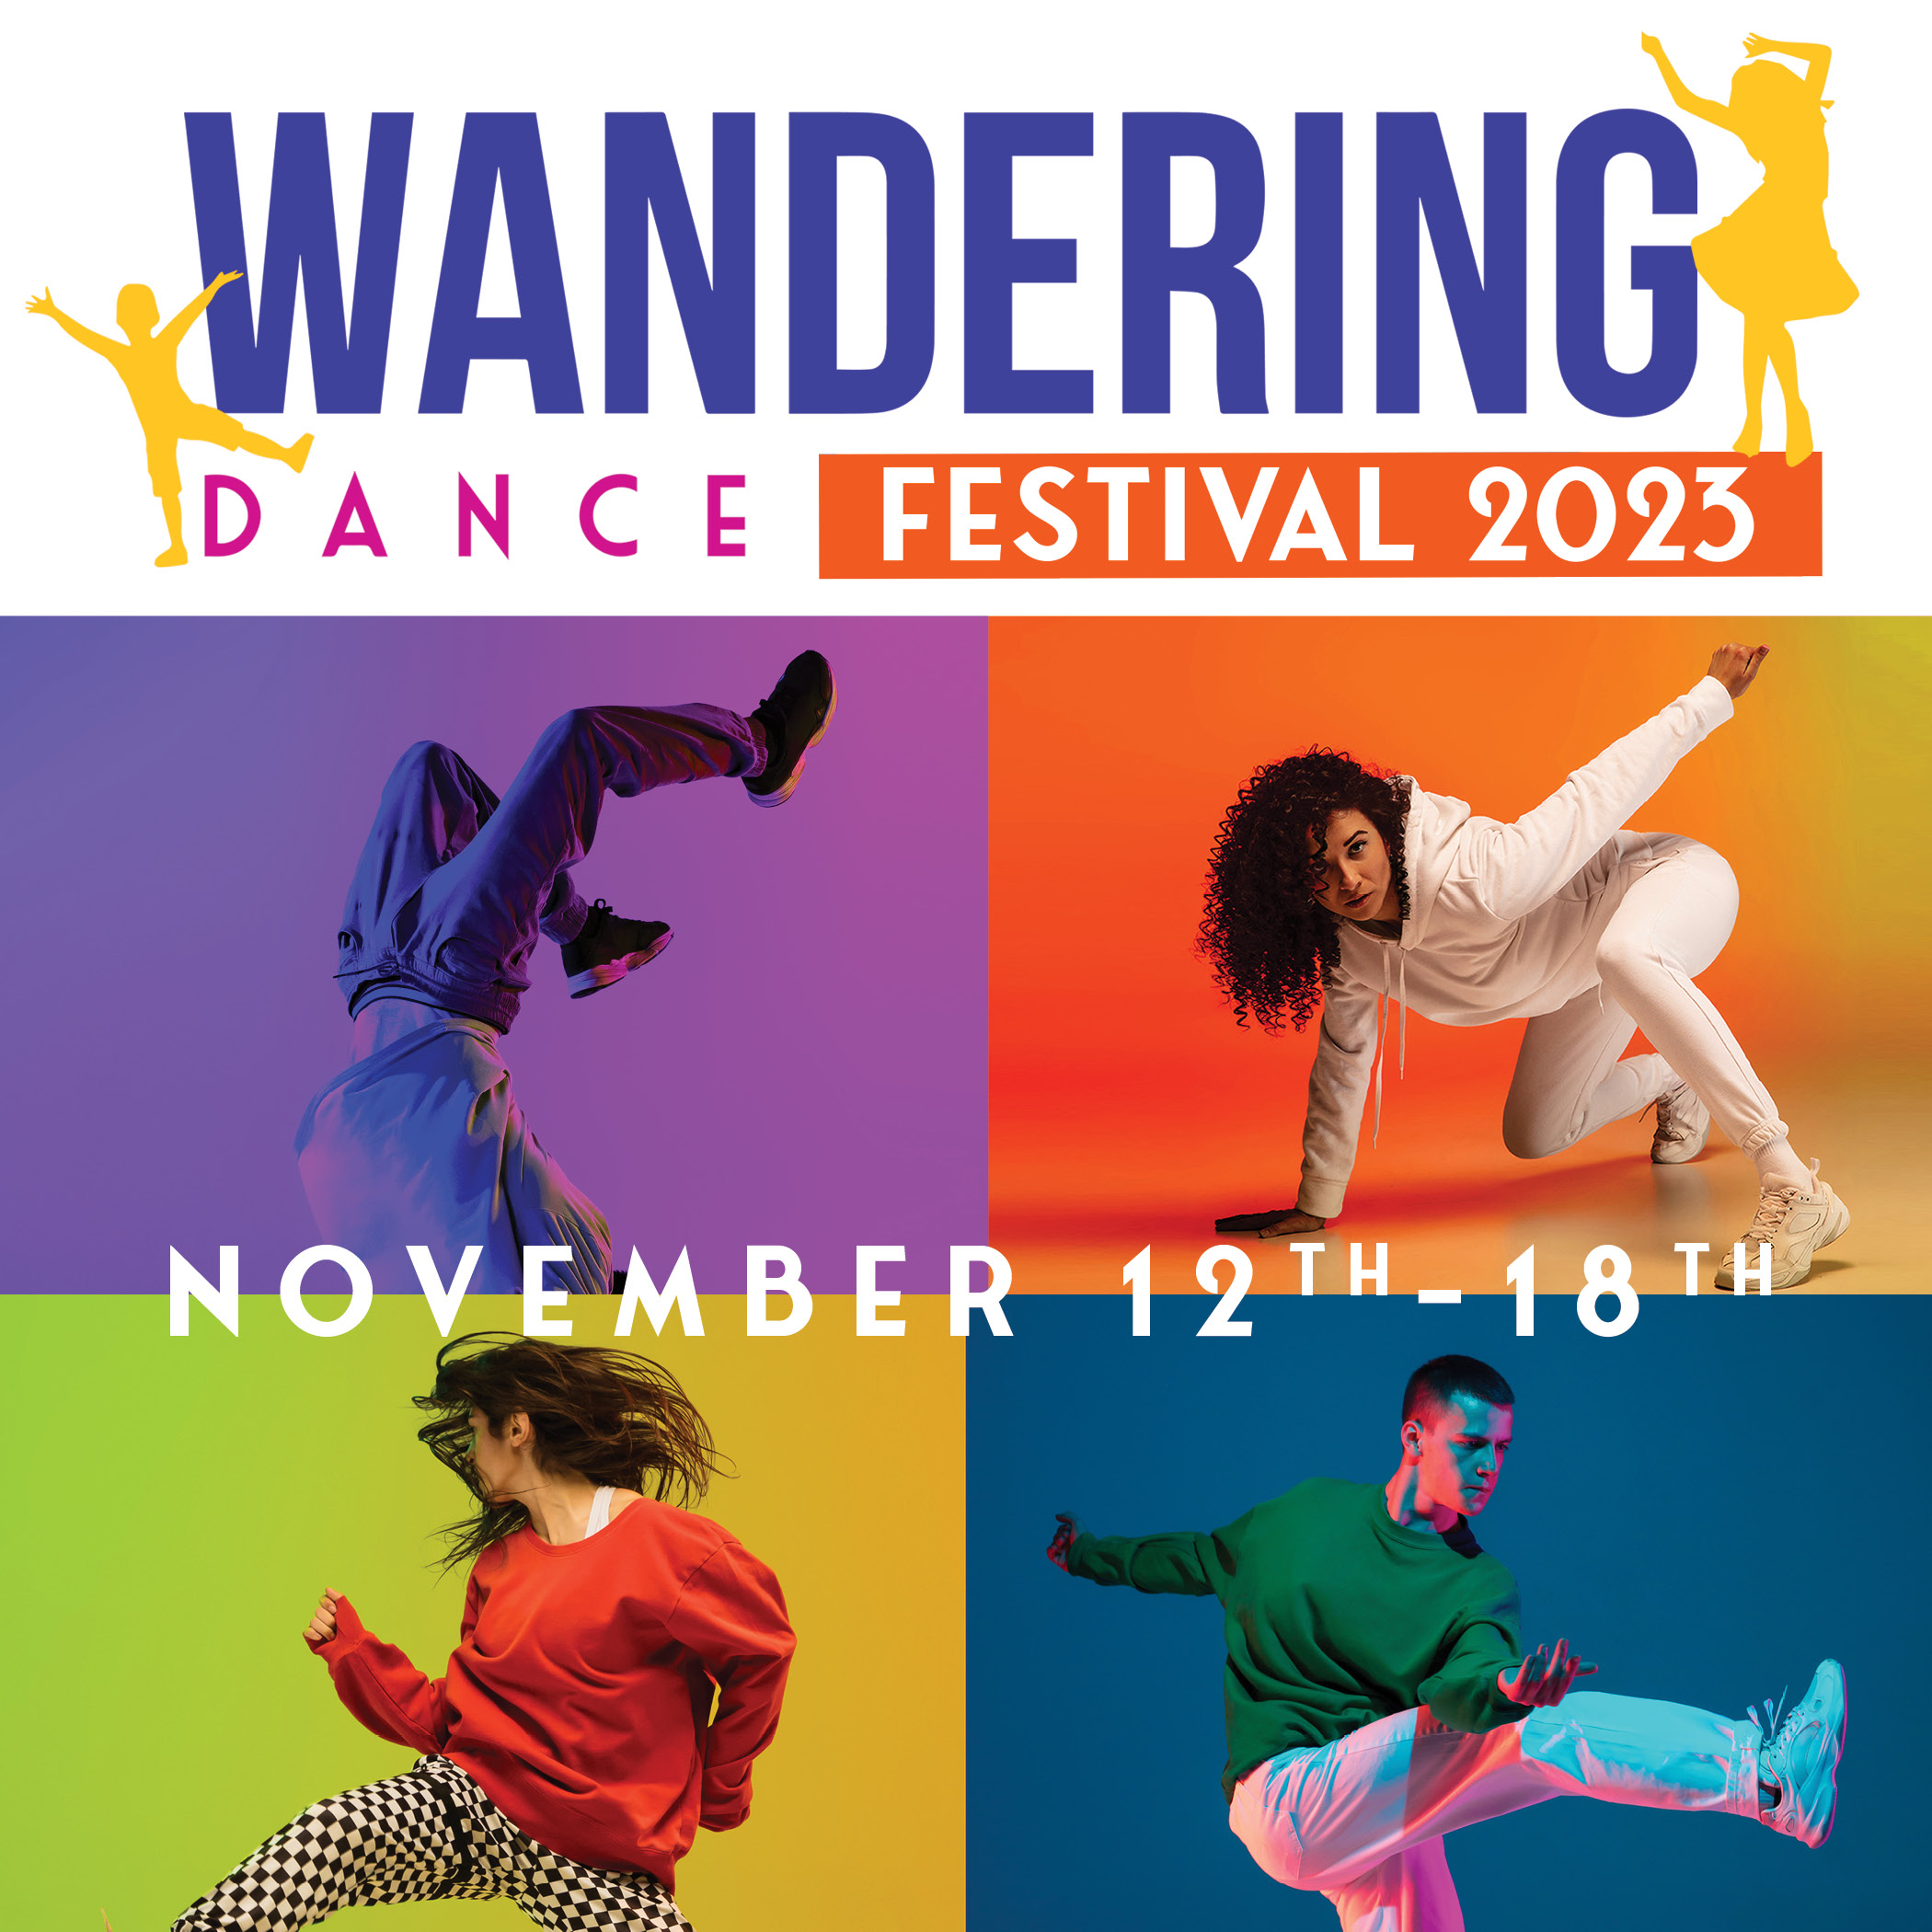 Graphic reading Wandering Dance Festival 2023 with images of dancers